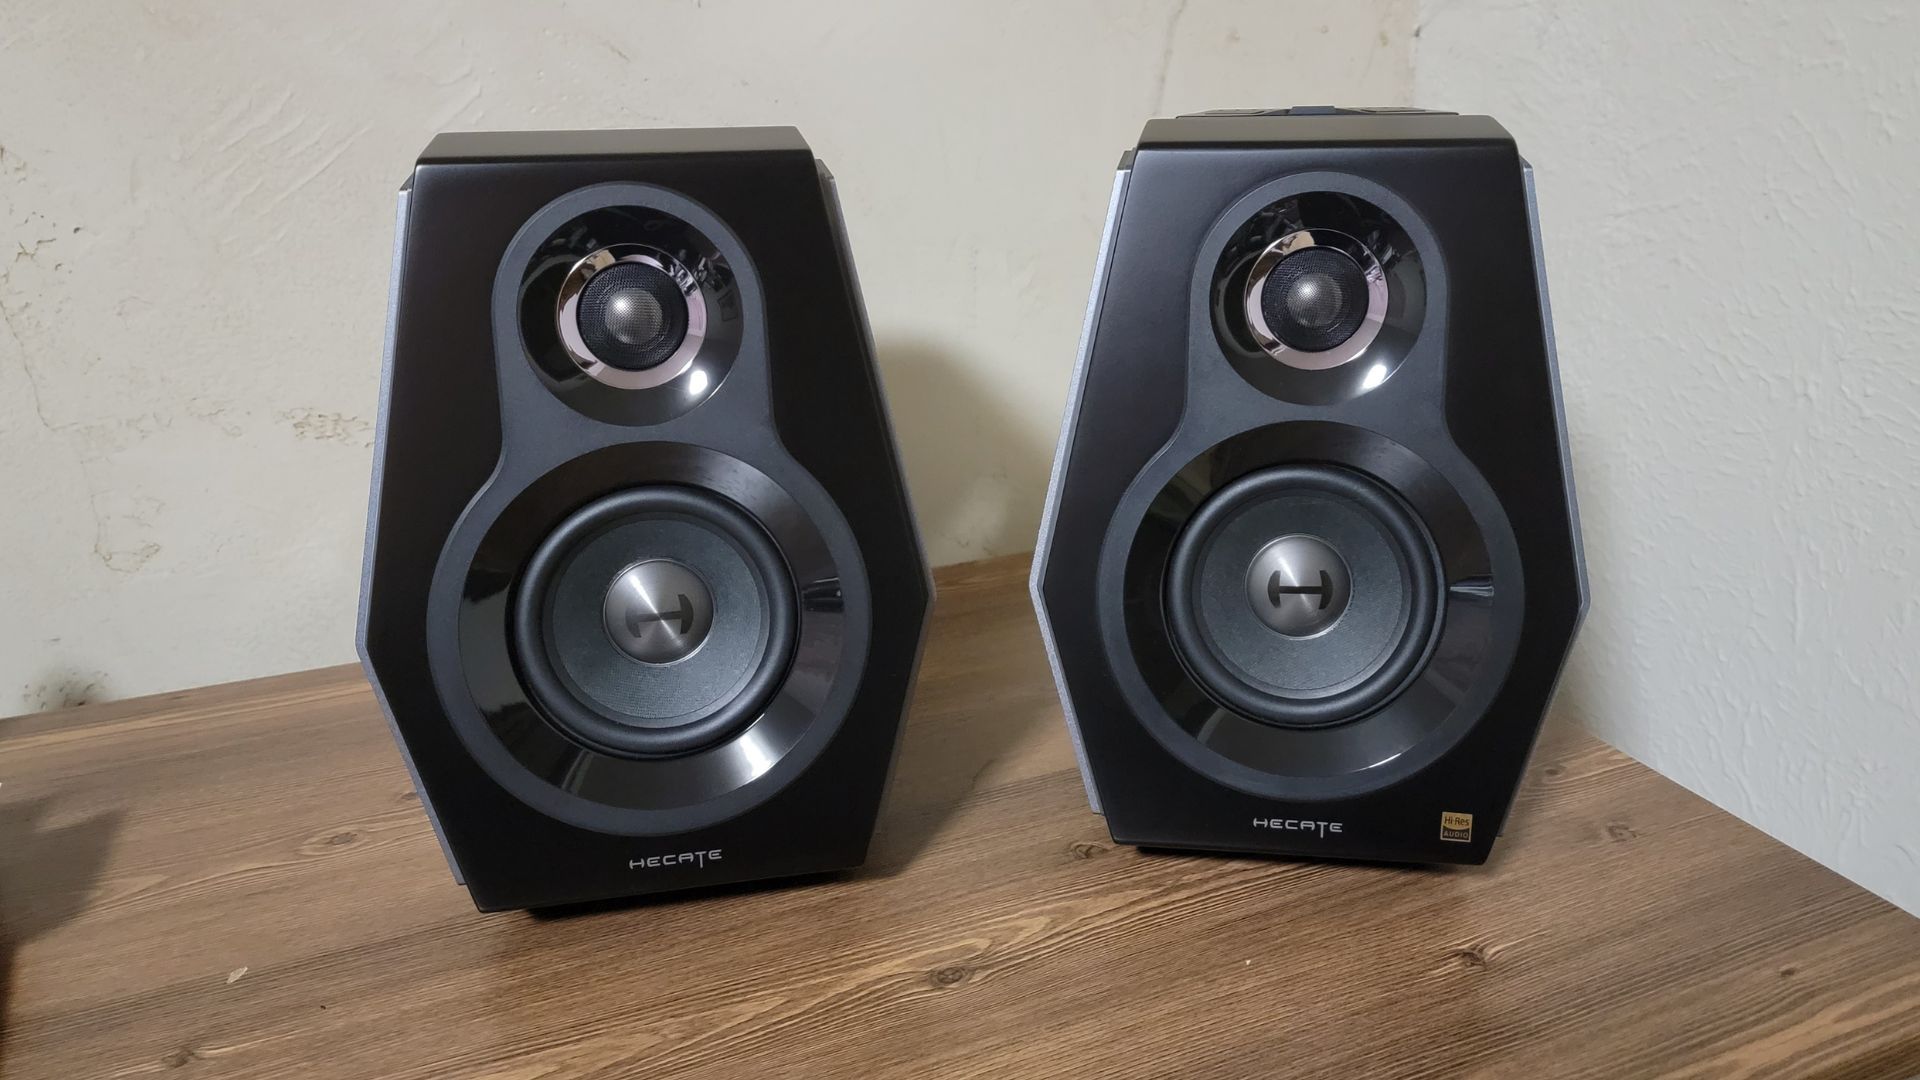 Edifier G2000 PC speaker review: Good looks don’t come cheap